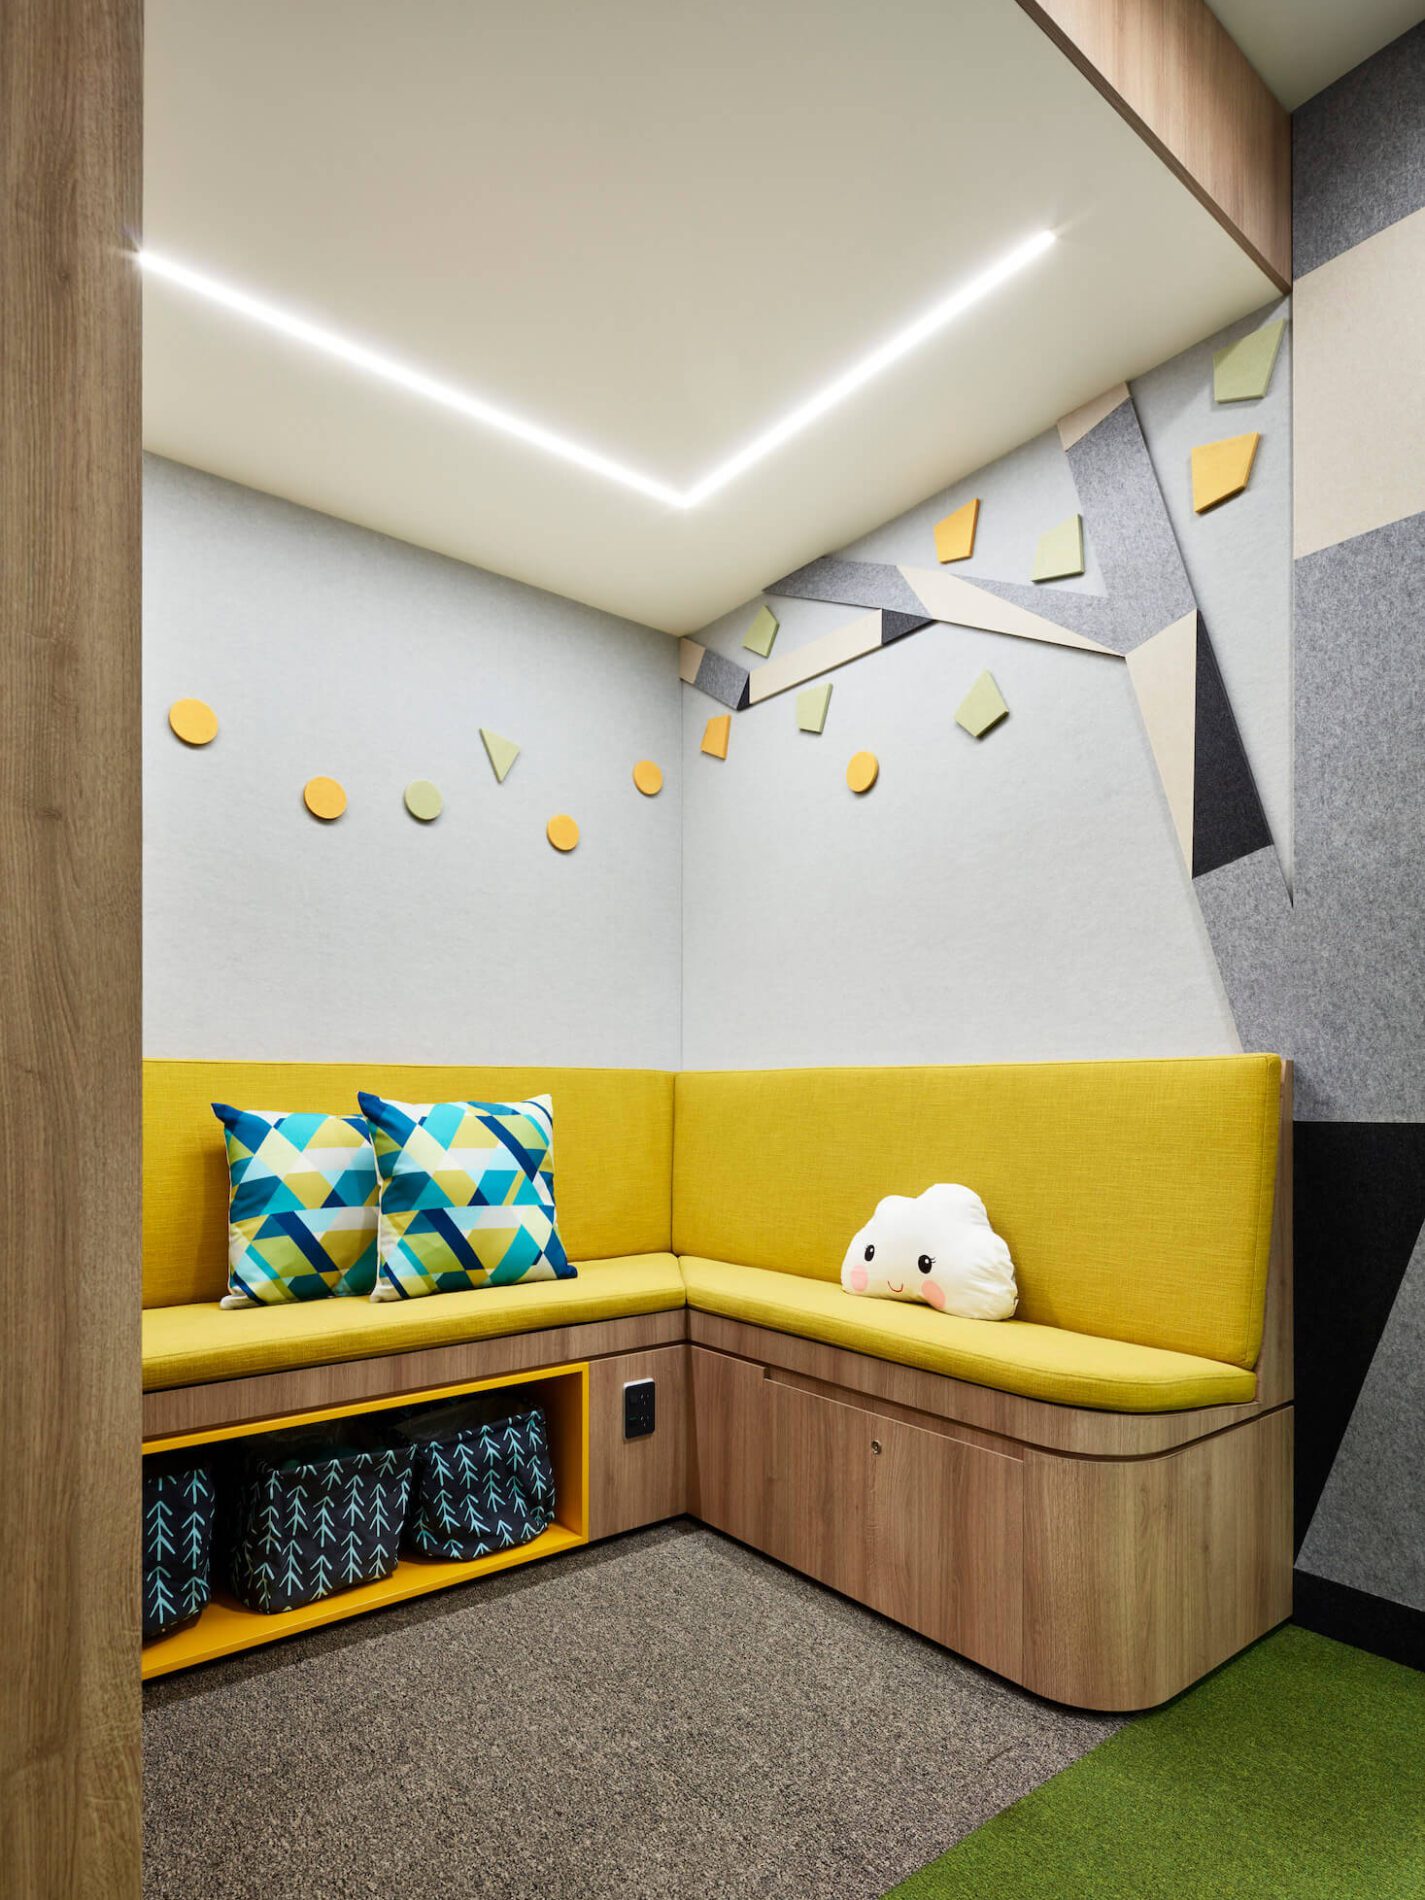 Cubby nook with yellow padded bench seating, felt wall decals, cloud pillow and patterned toy storage bags